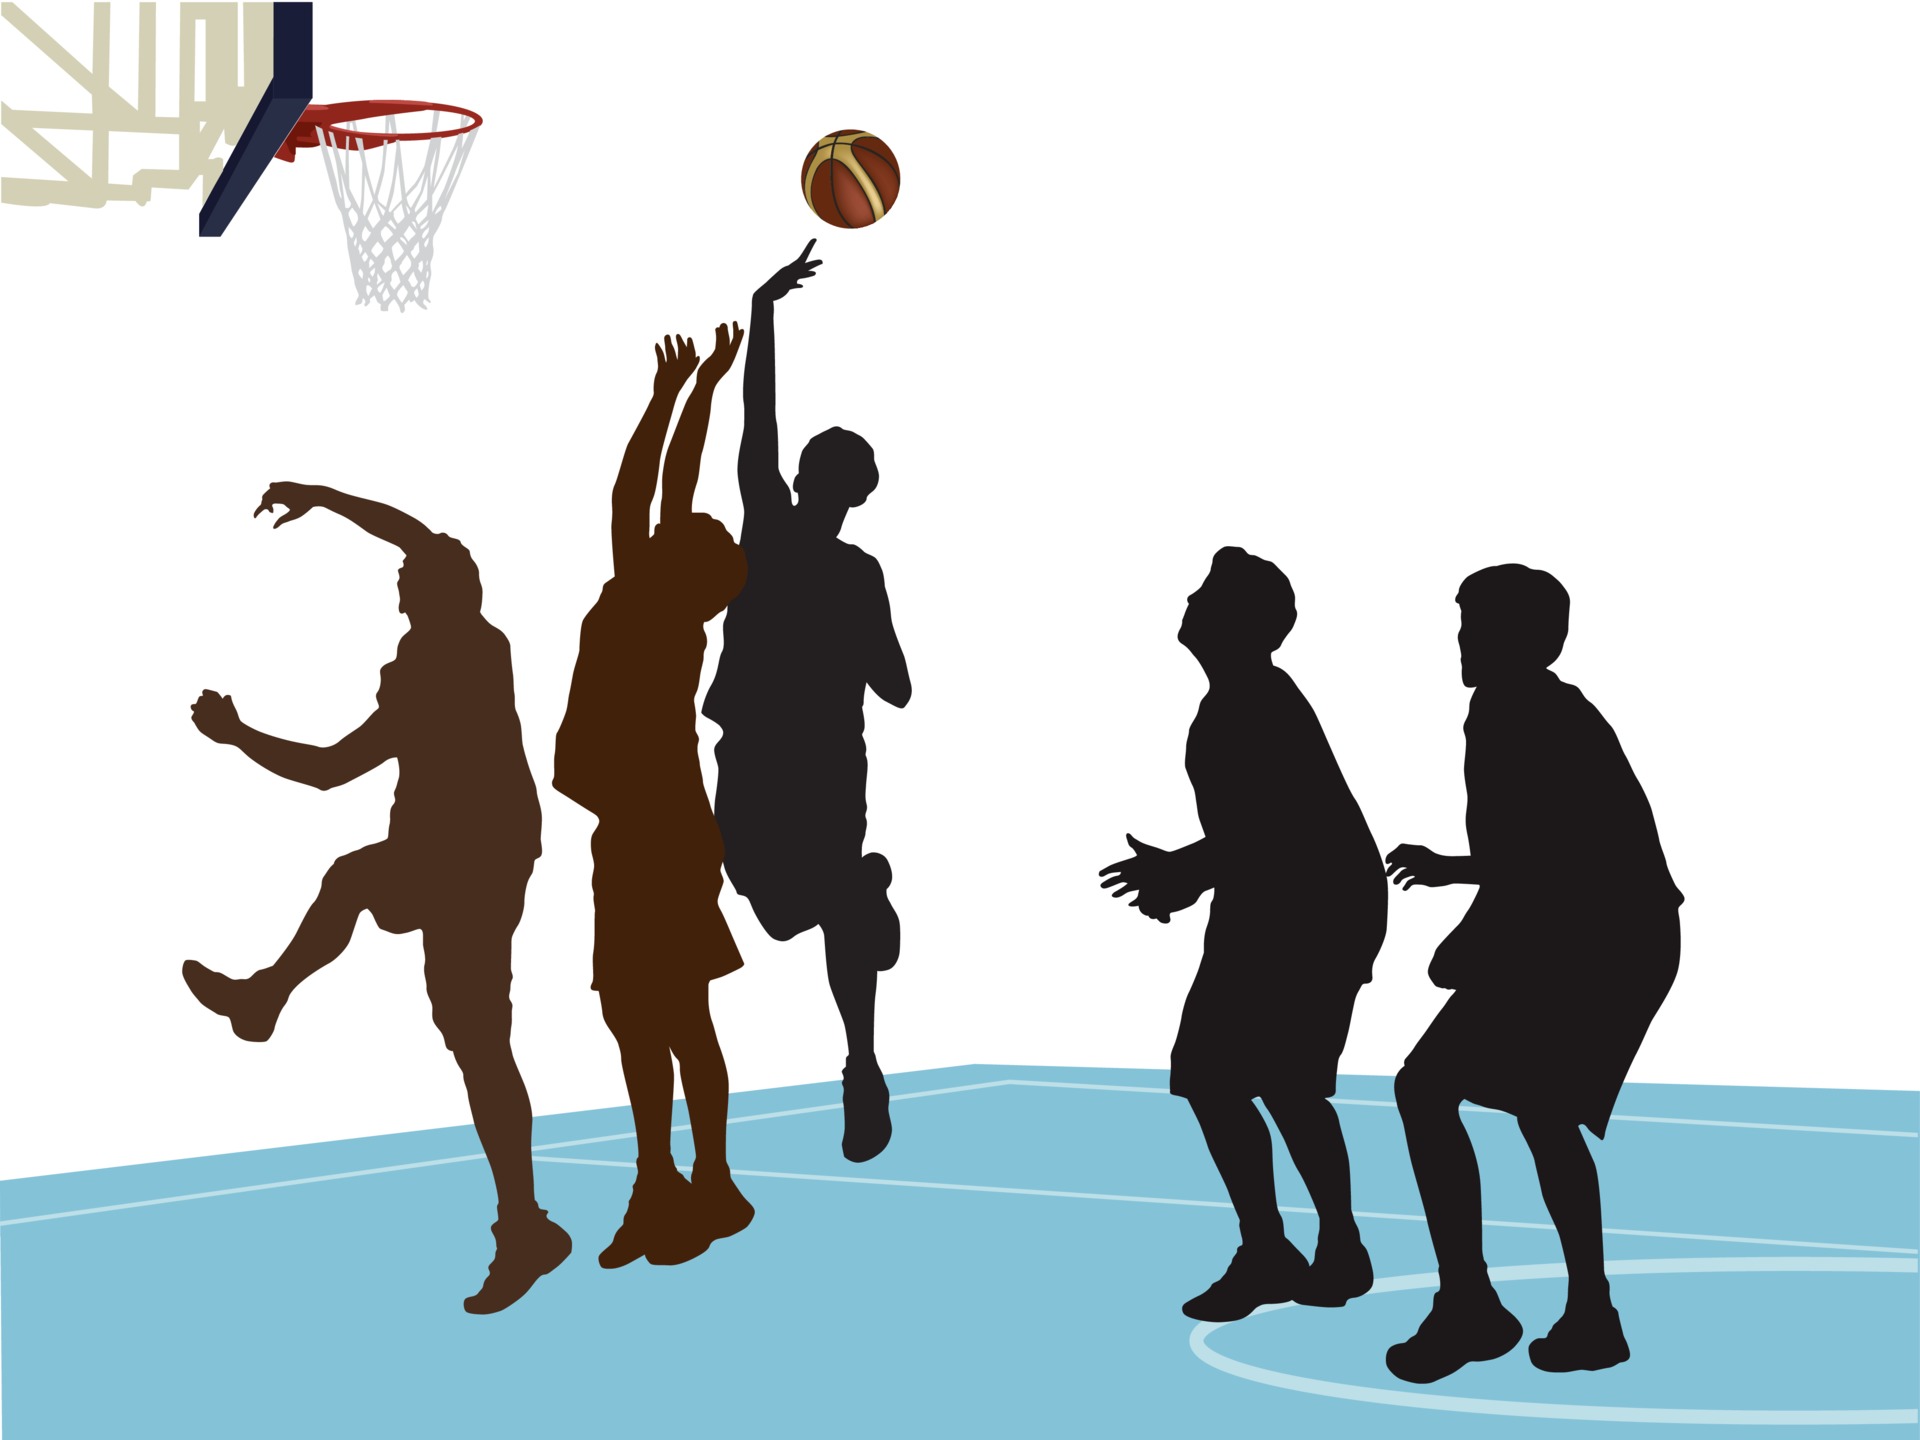 basketball player action illustration clip art collection Stock Vector